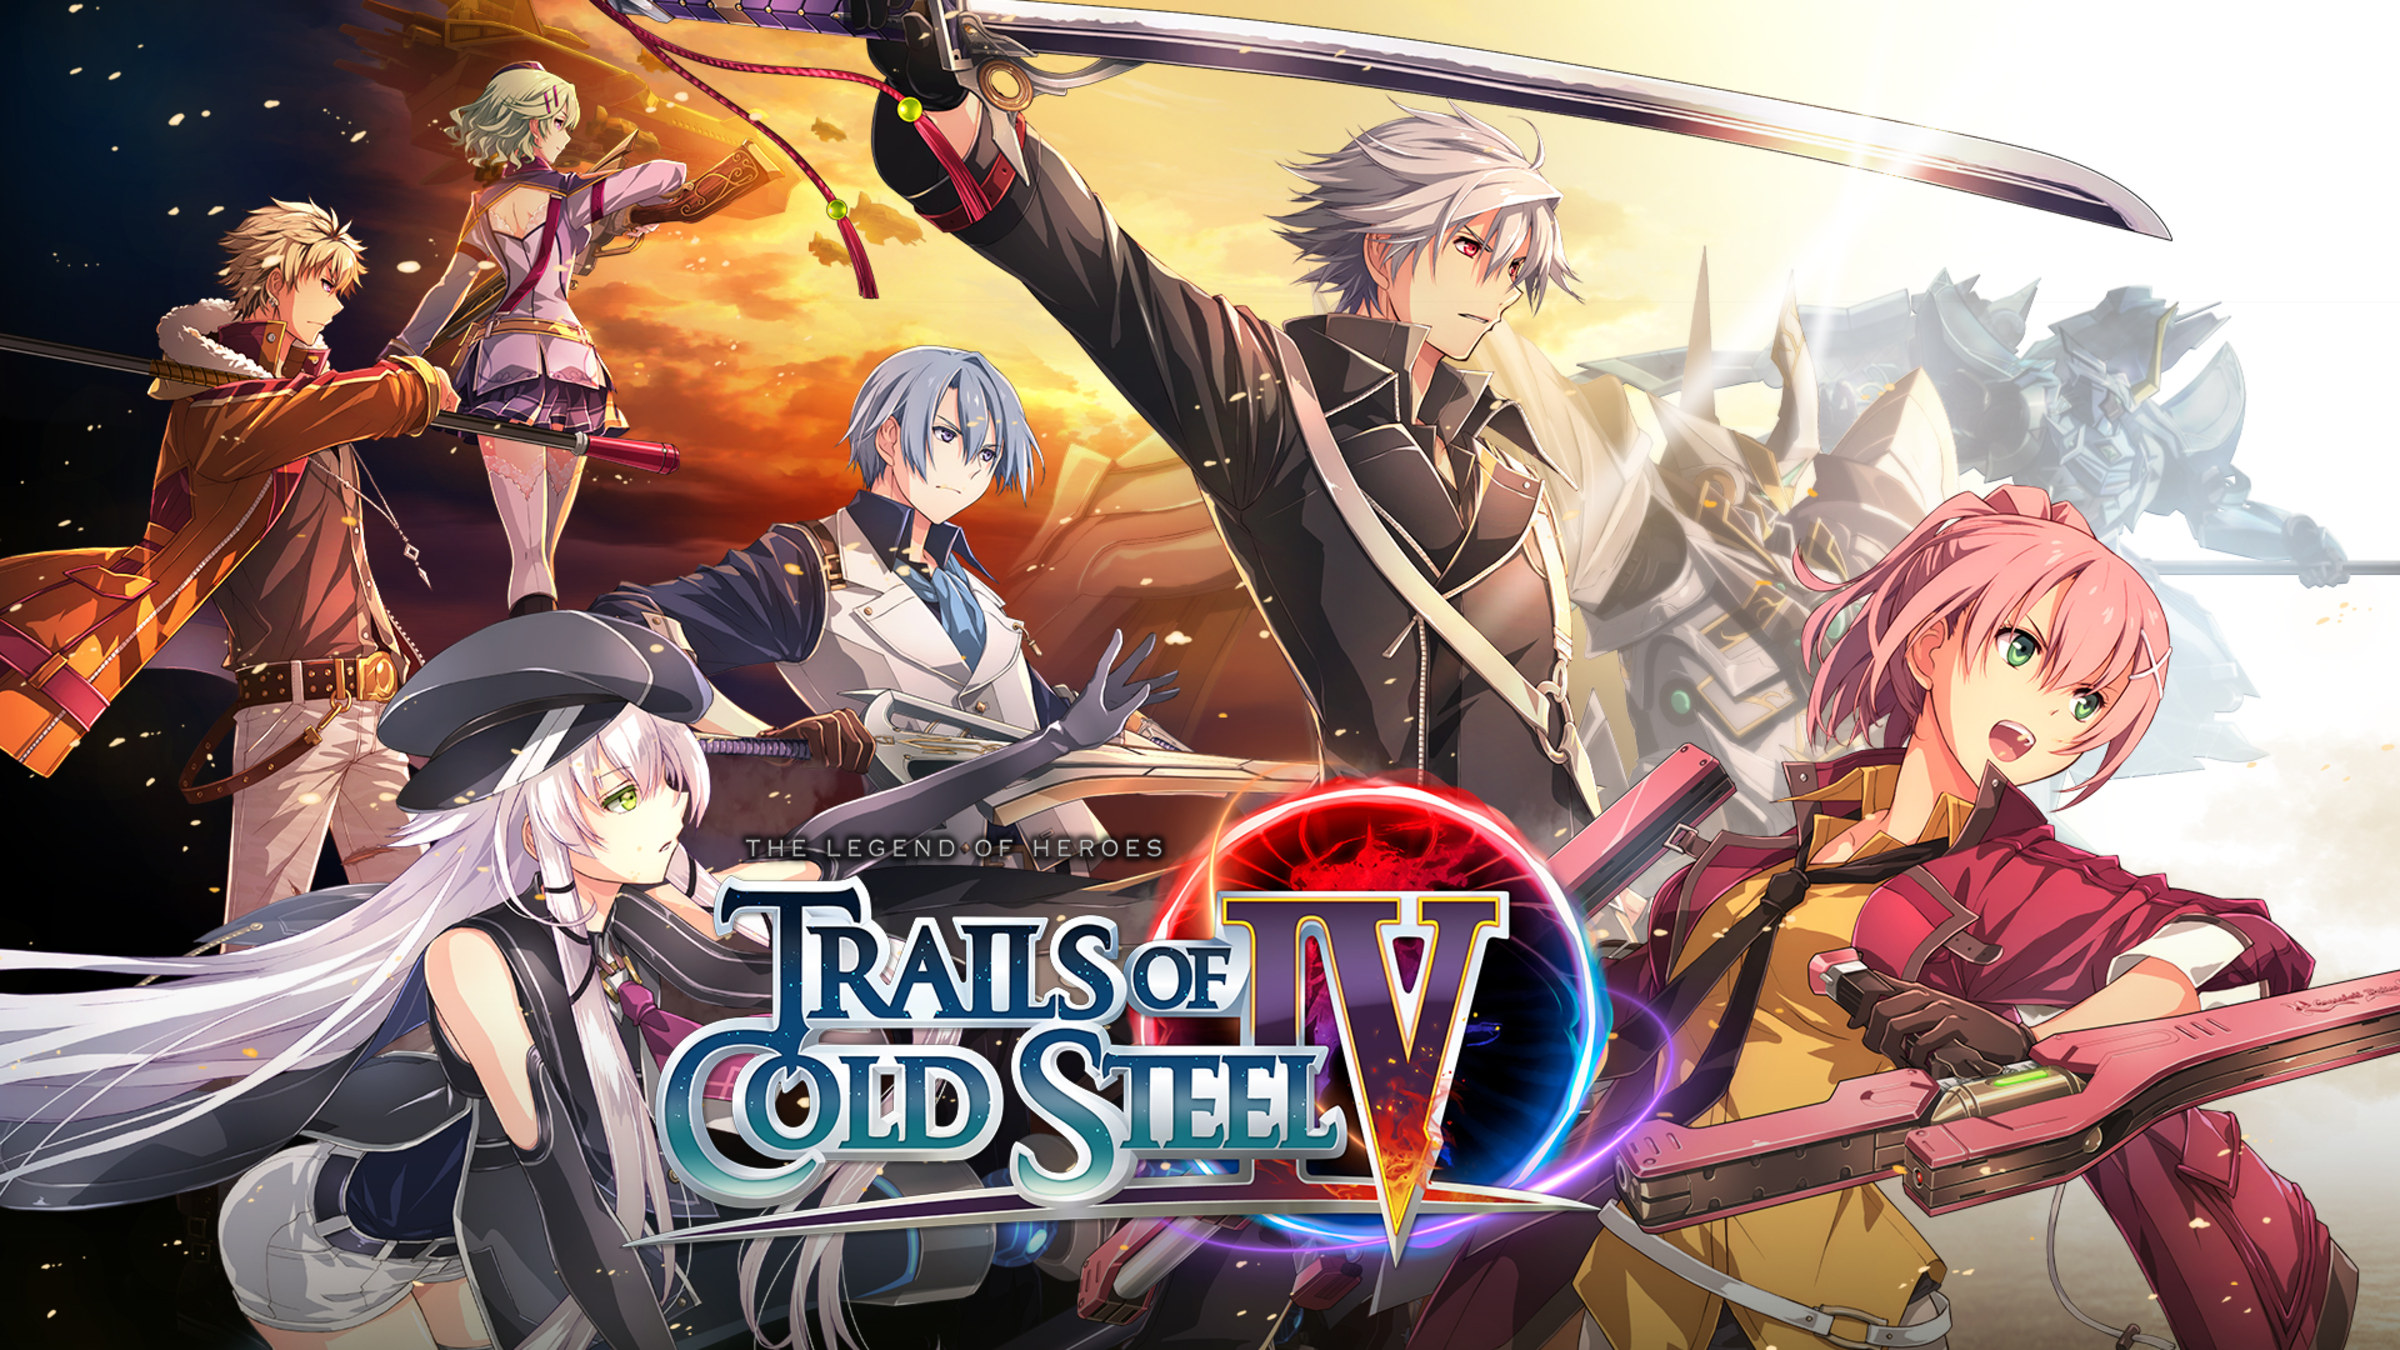 trails of cold steel 4 game save file location